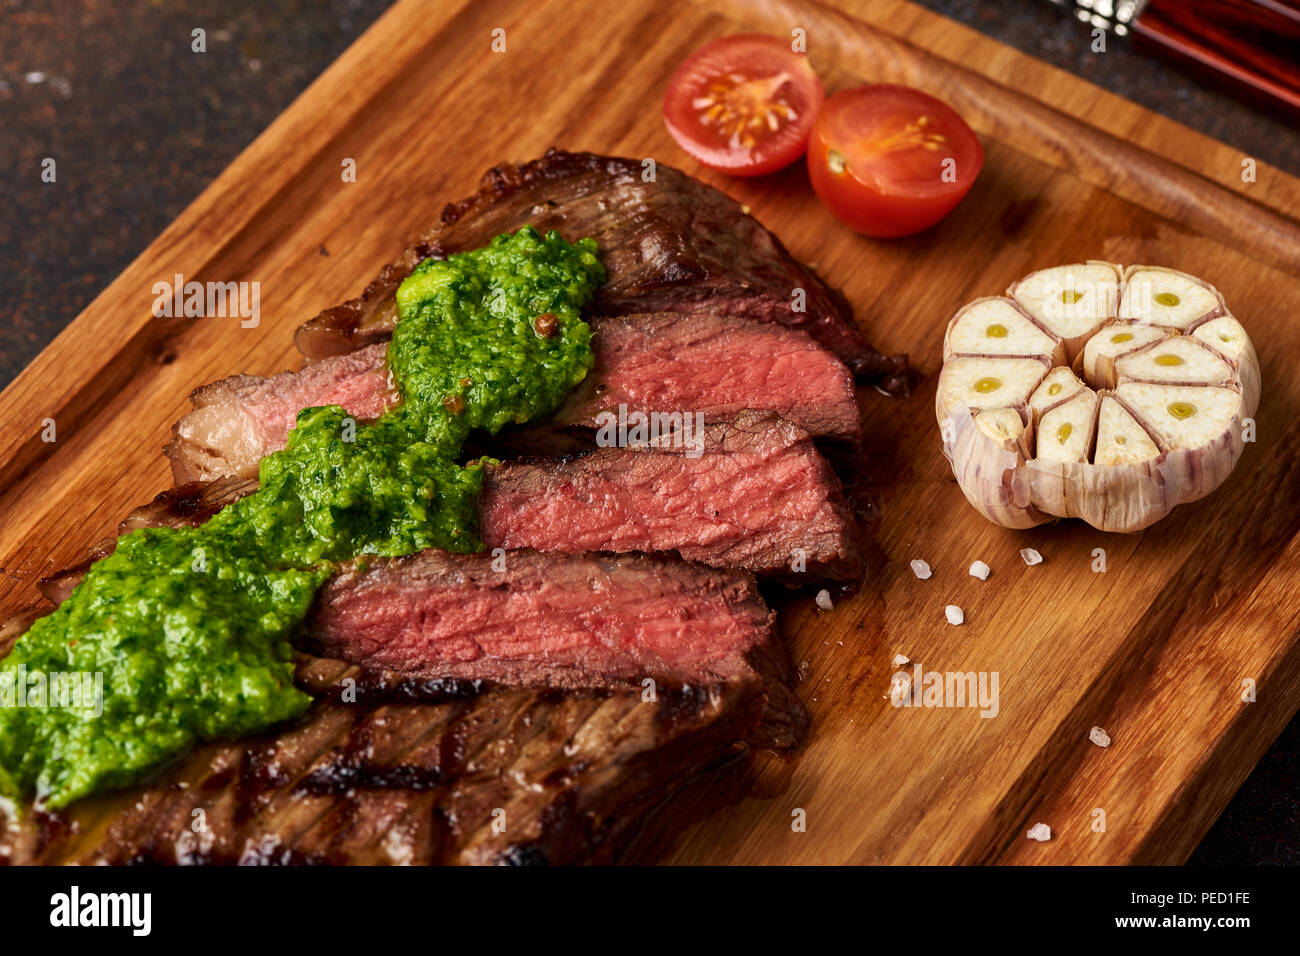 Grilled Black Angus Steak with tomatoes, garlic with chimichurri sauce on meat cutting board. Stock Photo